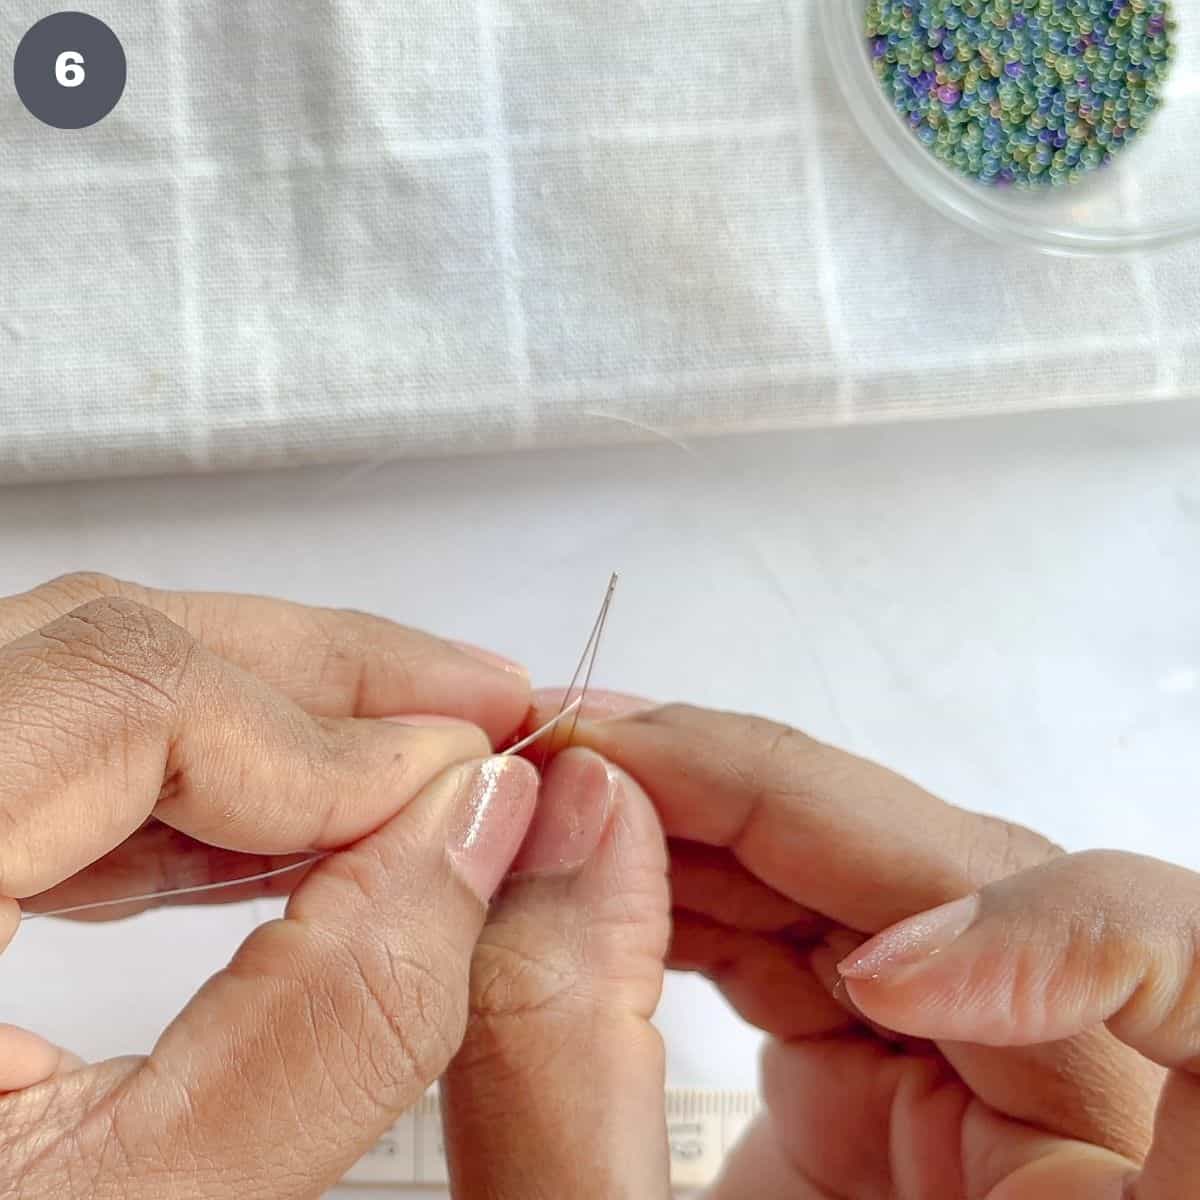 Inserting thread into a needle.